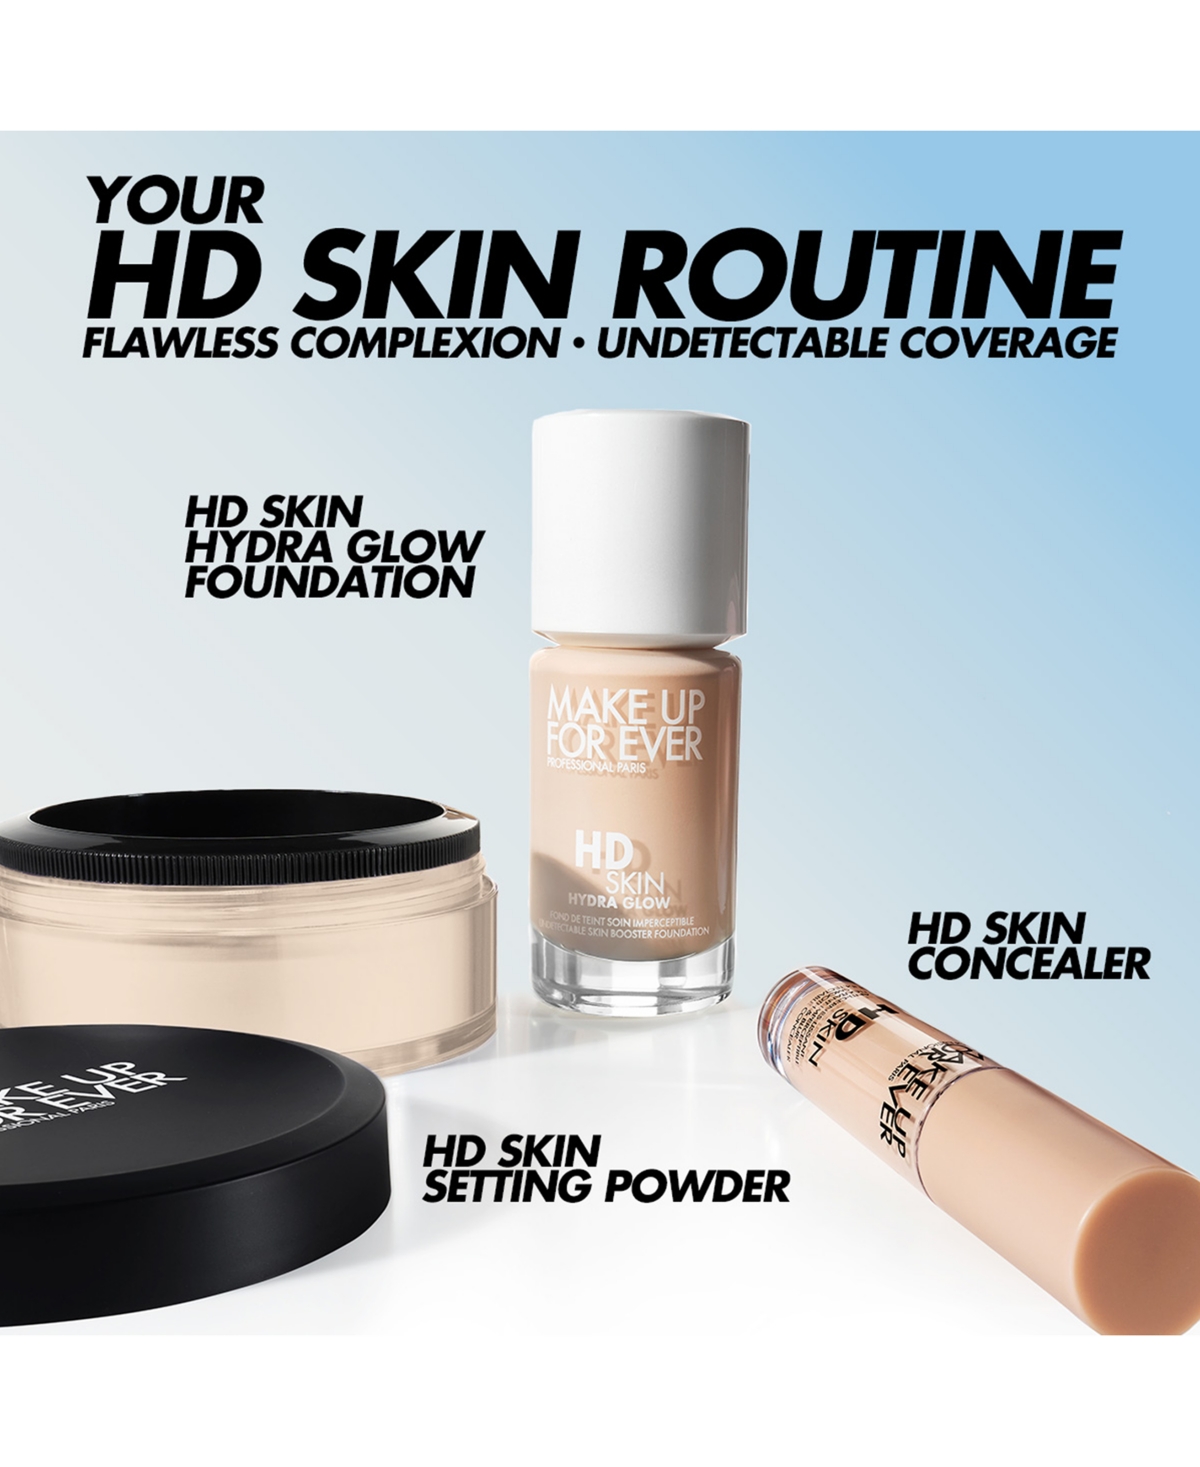 Shop Make Up For Ever Hd Skin Hydra Glow Skincare Foundation With Hyaluronic Acid In R - Cool Alabaster - For Fair Skin With